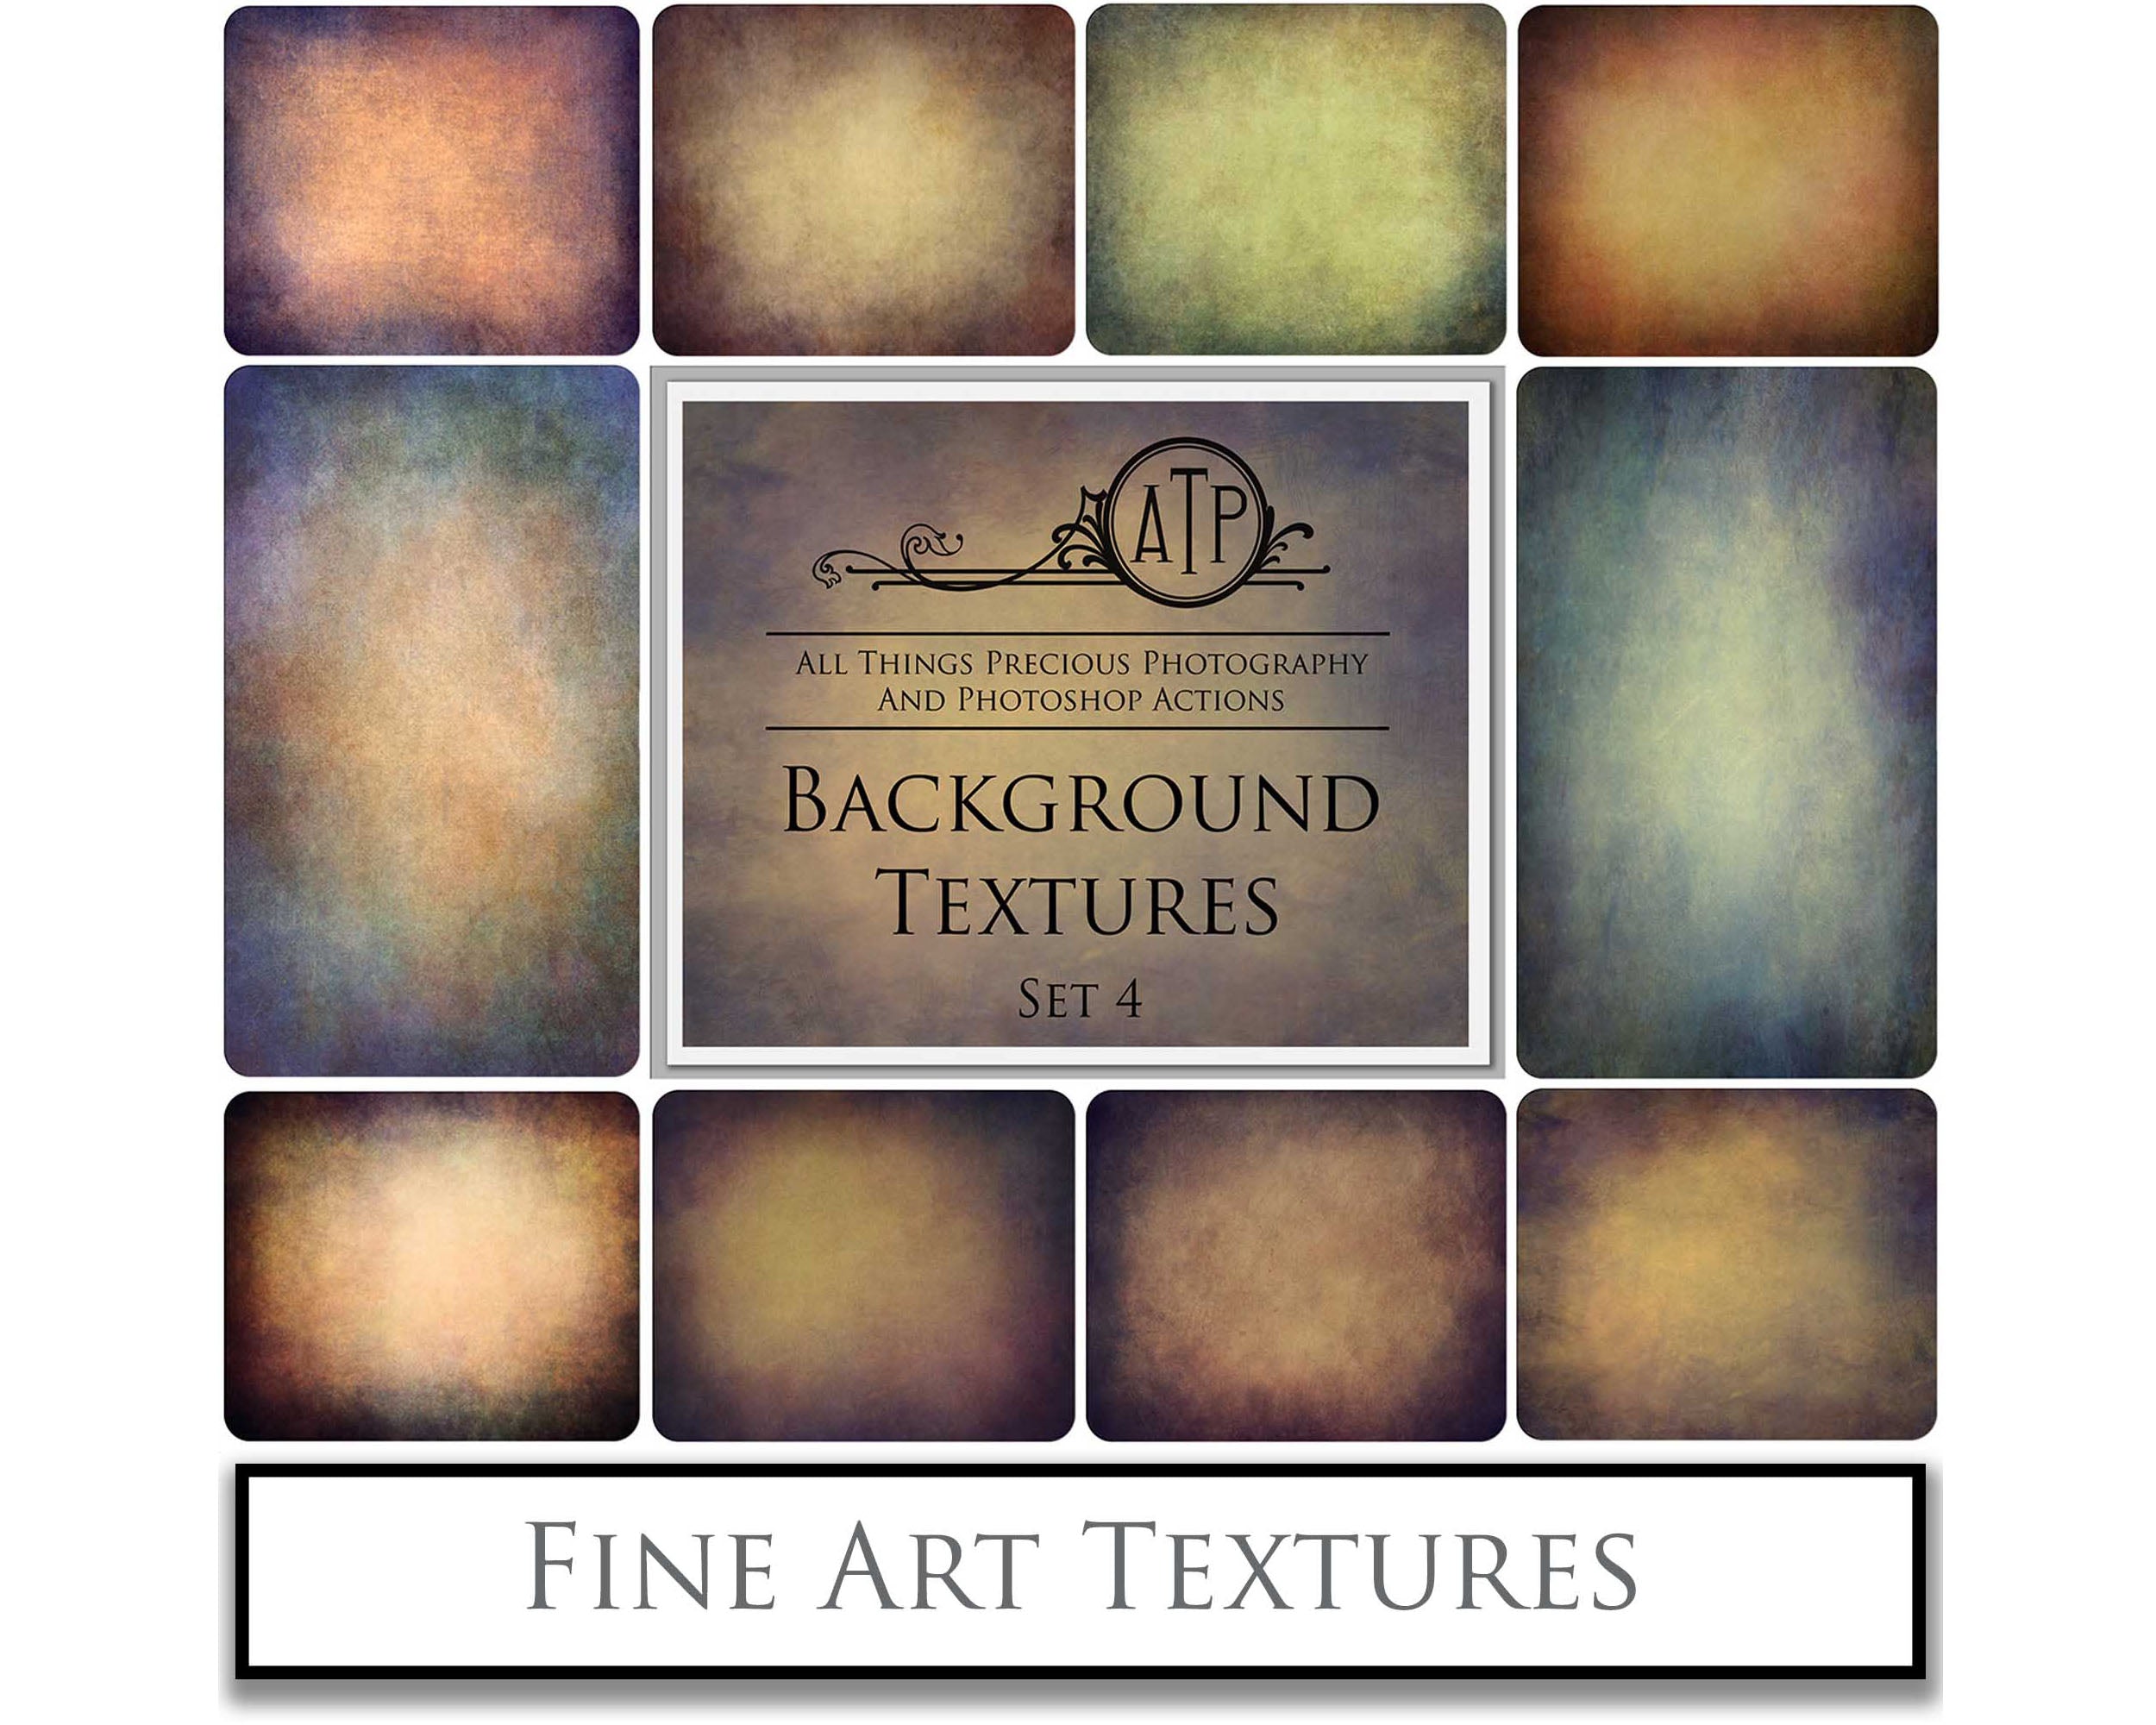 Fine Art Textures. For photography or print as backdrops. High resolution download files. Grunge, Warm, Light, Digital Add Ons. Canvas, Dark, Painterly, Color design. Jpeg overlay. photoshop editing graphic assets. by ATP textures.